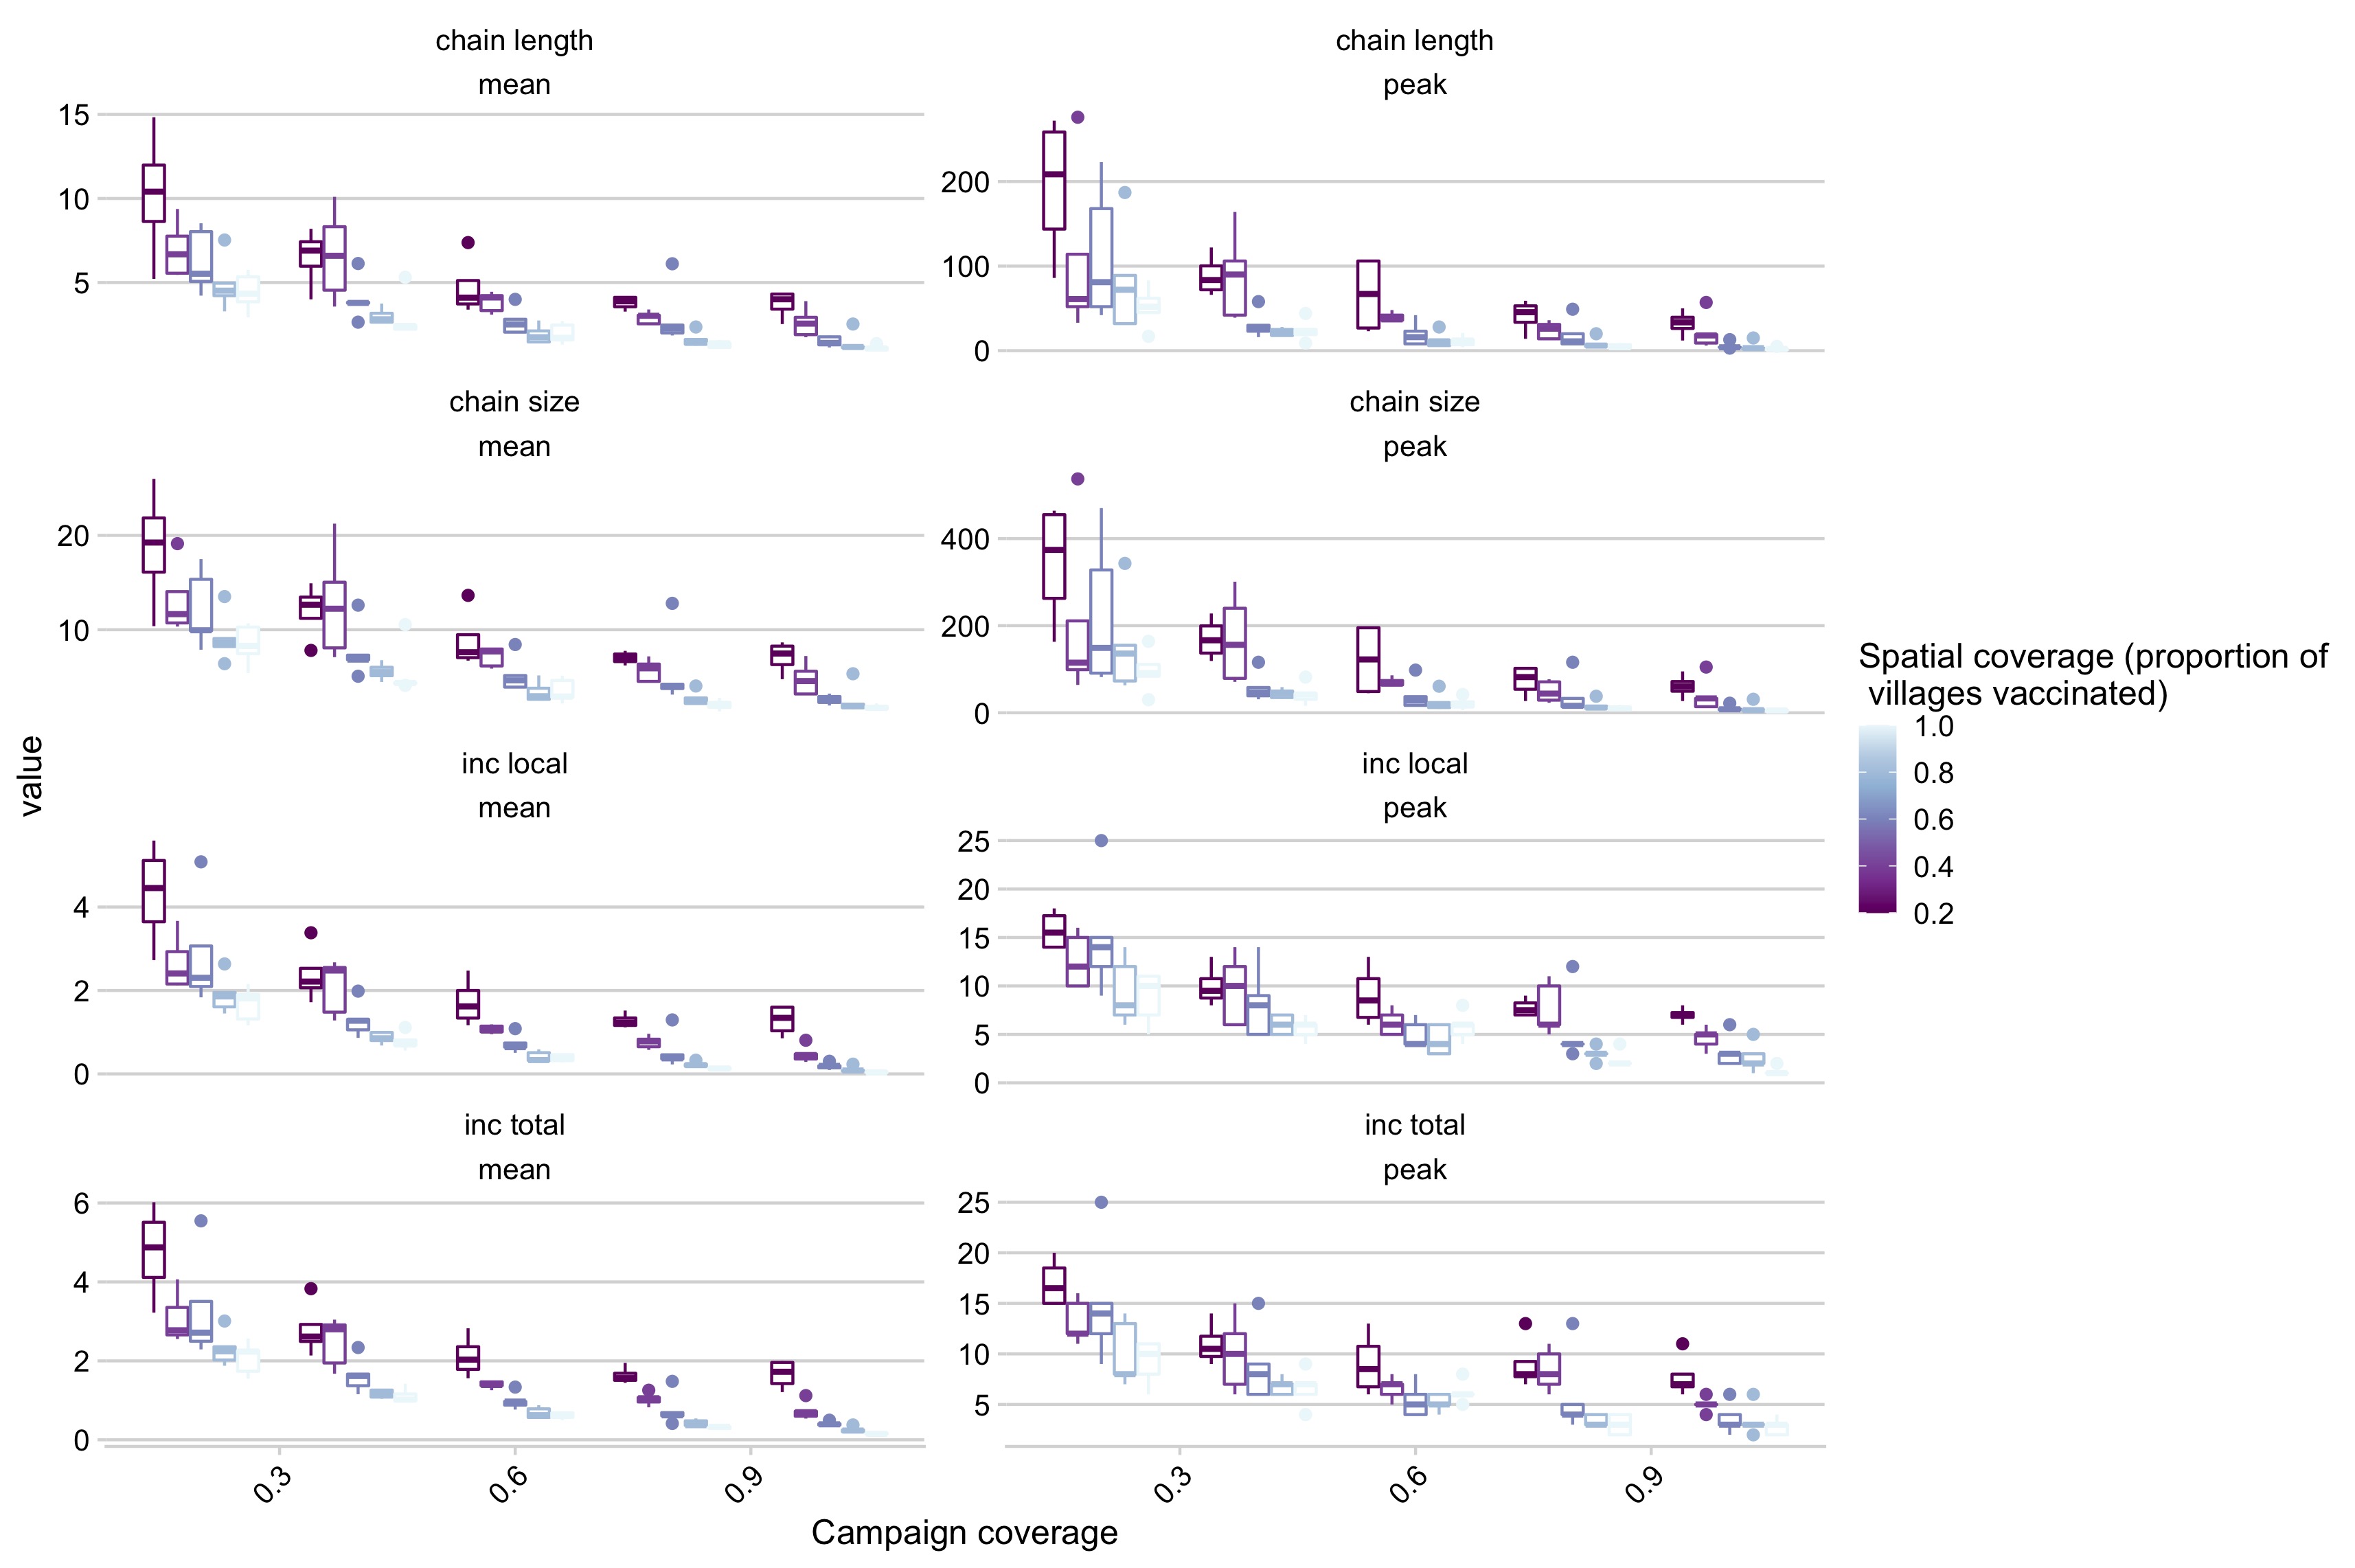 Simulation outcomes across a range of campaign coverage and spatial coverage incorporating reductions in the introduction rate as district coverage increases where panels are different summary statistics of the simulations (i.e. chain length mean, chain length peak, etc.).